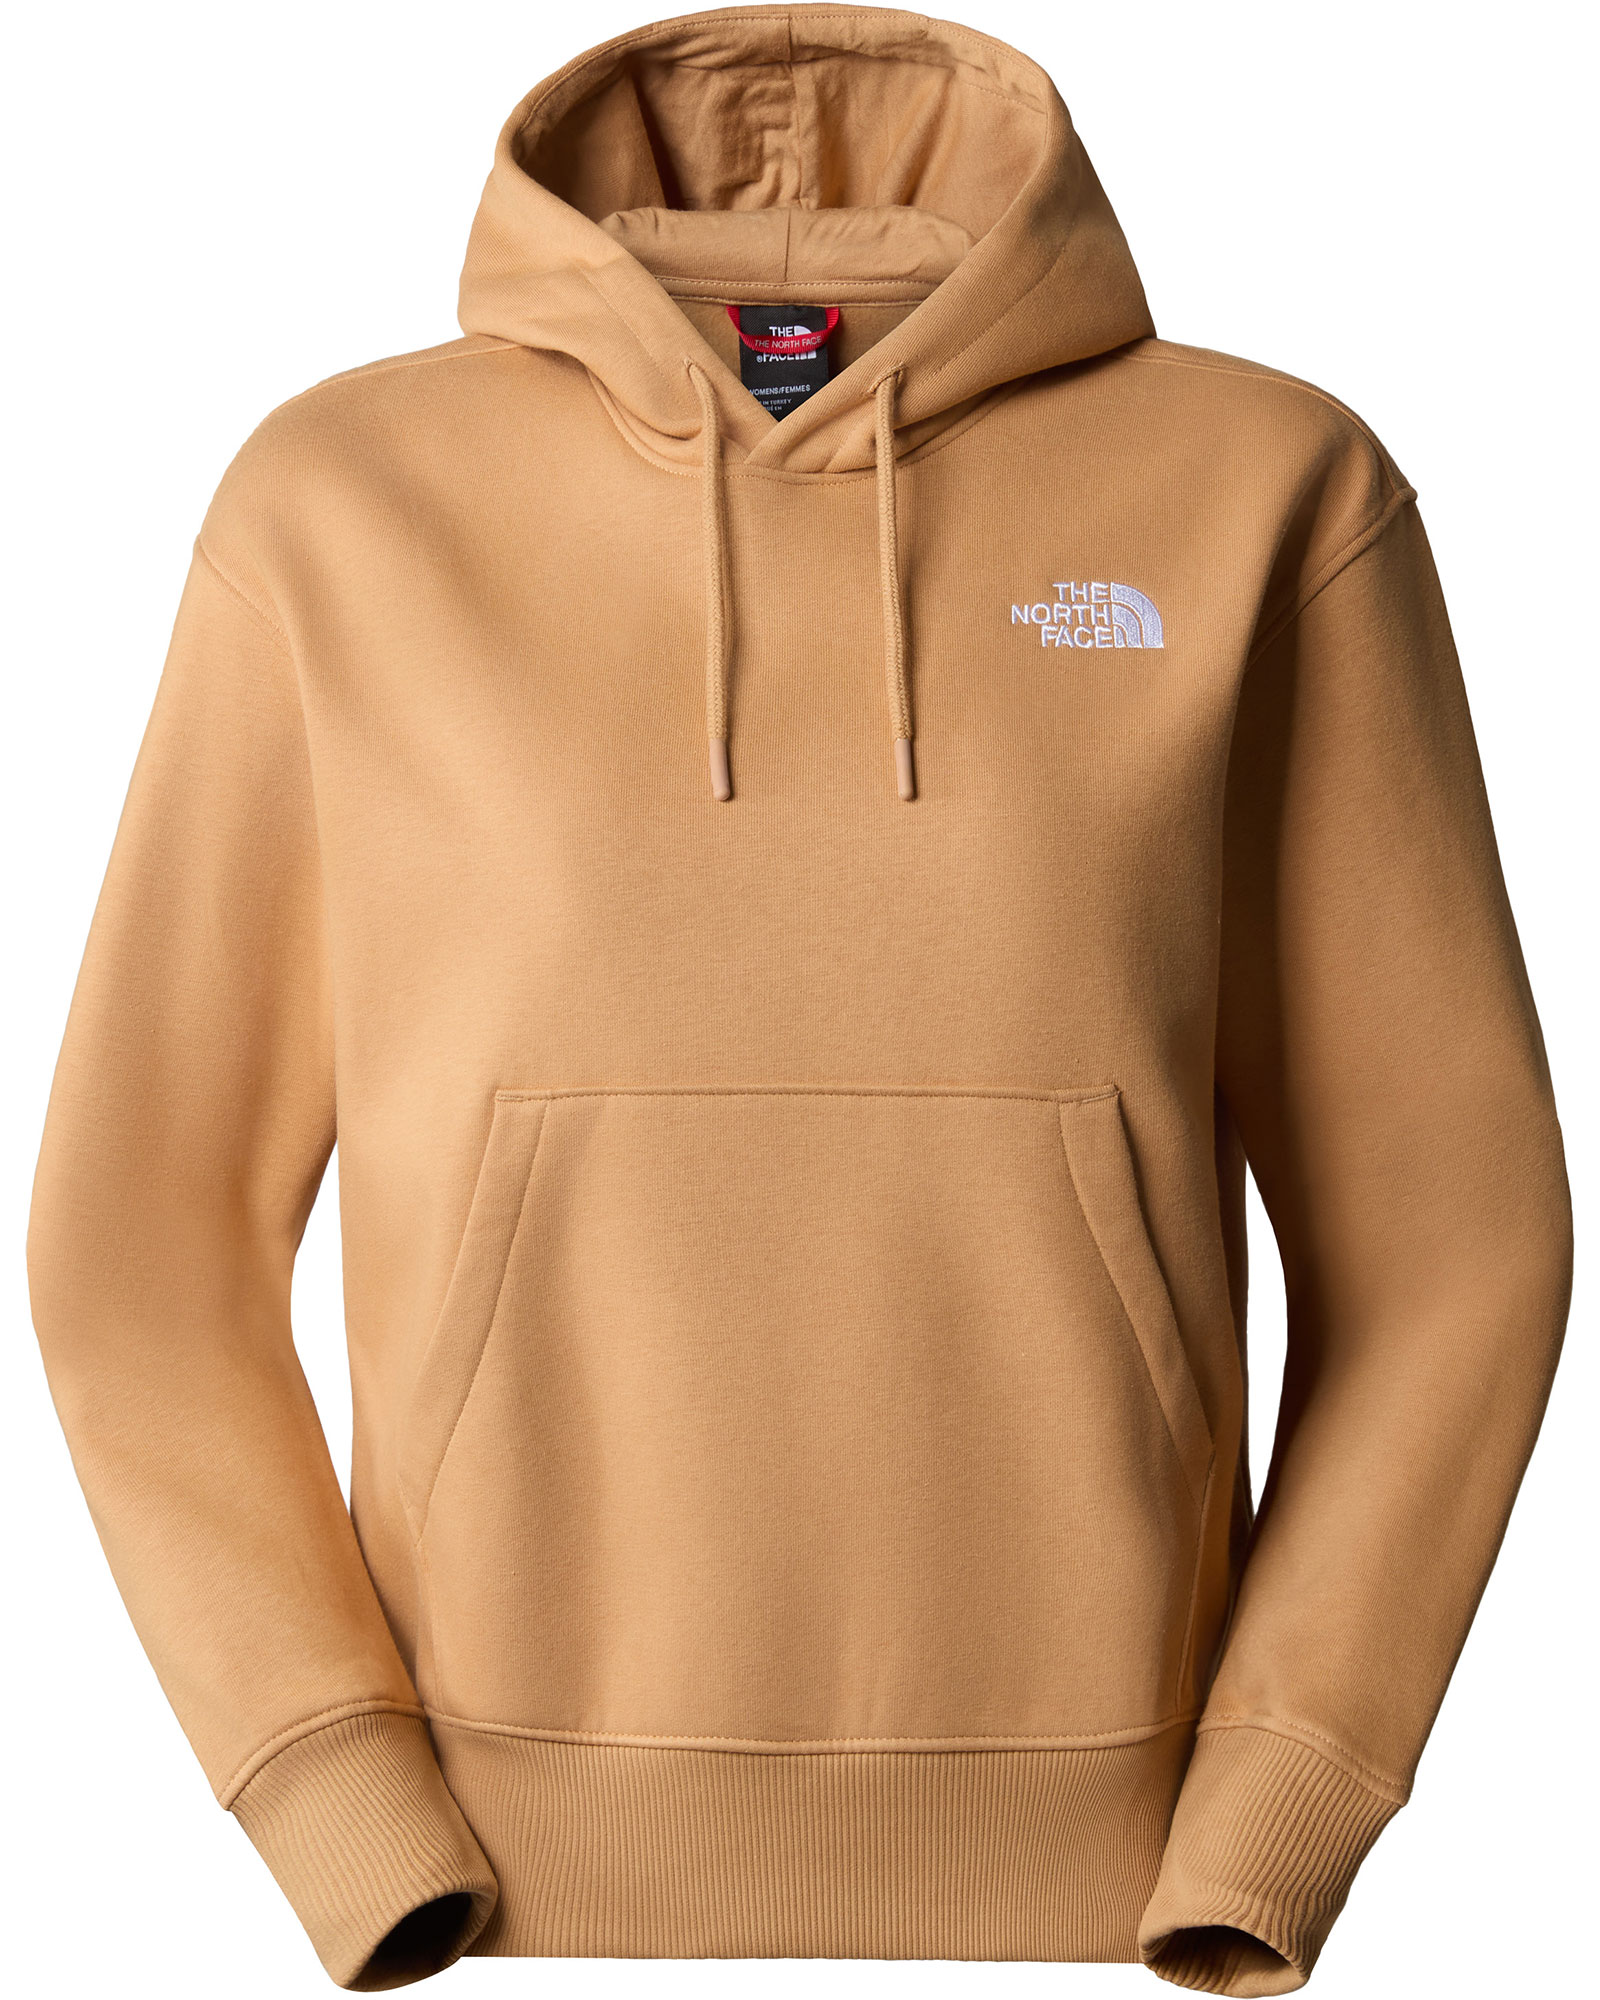 The North Face Women’s Essential Hoodie - Almond Butter S